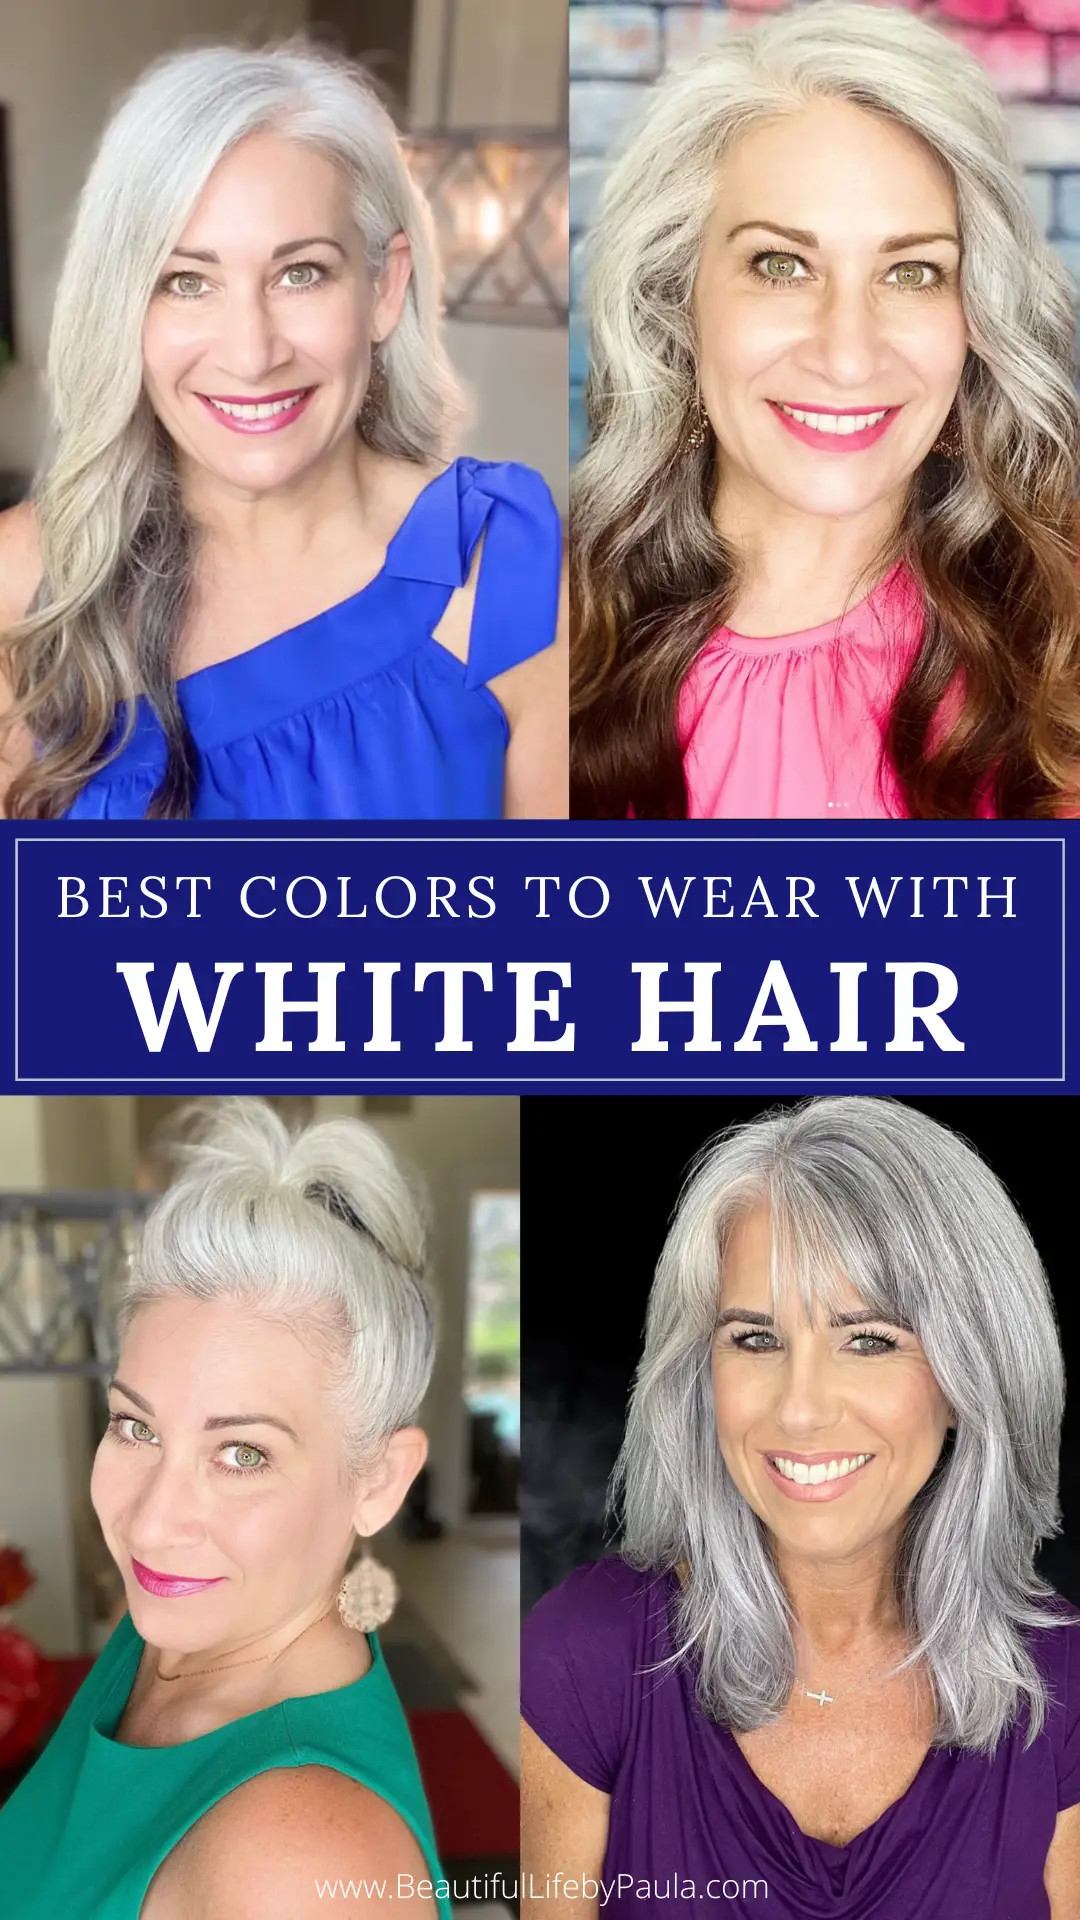 What Is the Difference Between Gray vs. White Hair? | LoveToKnow